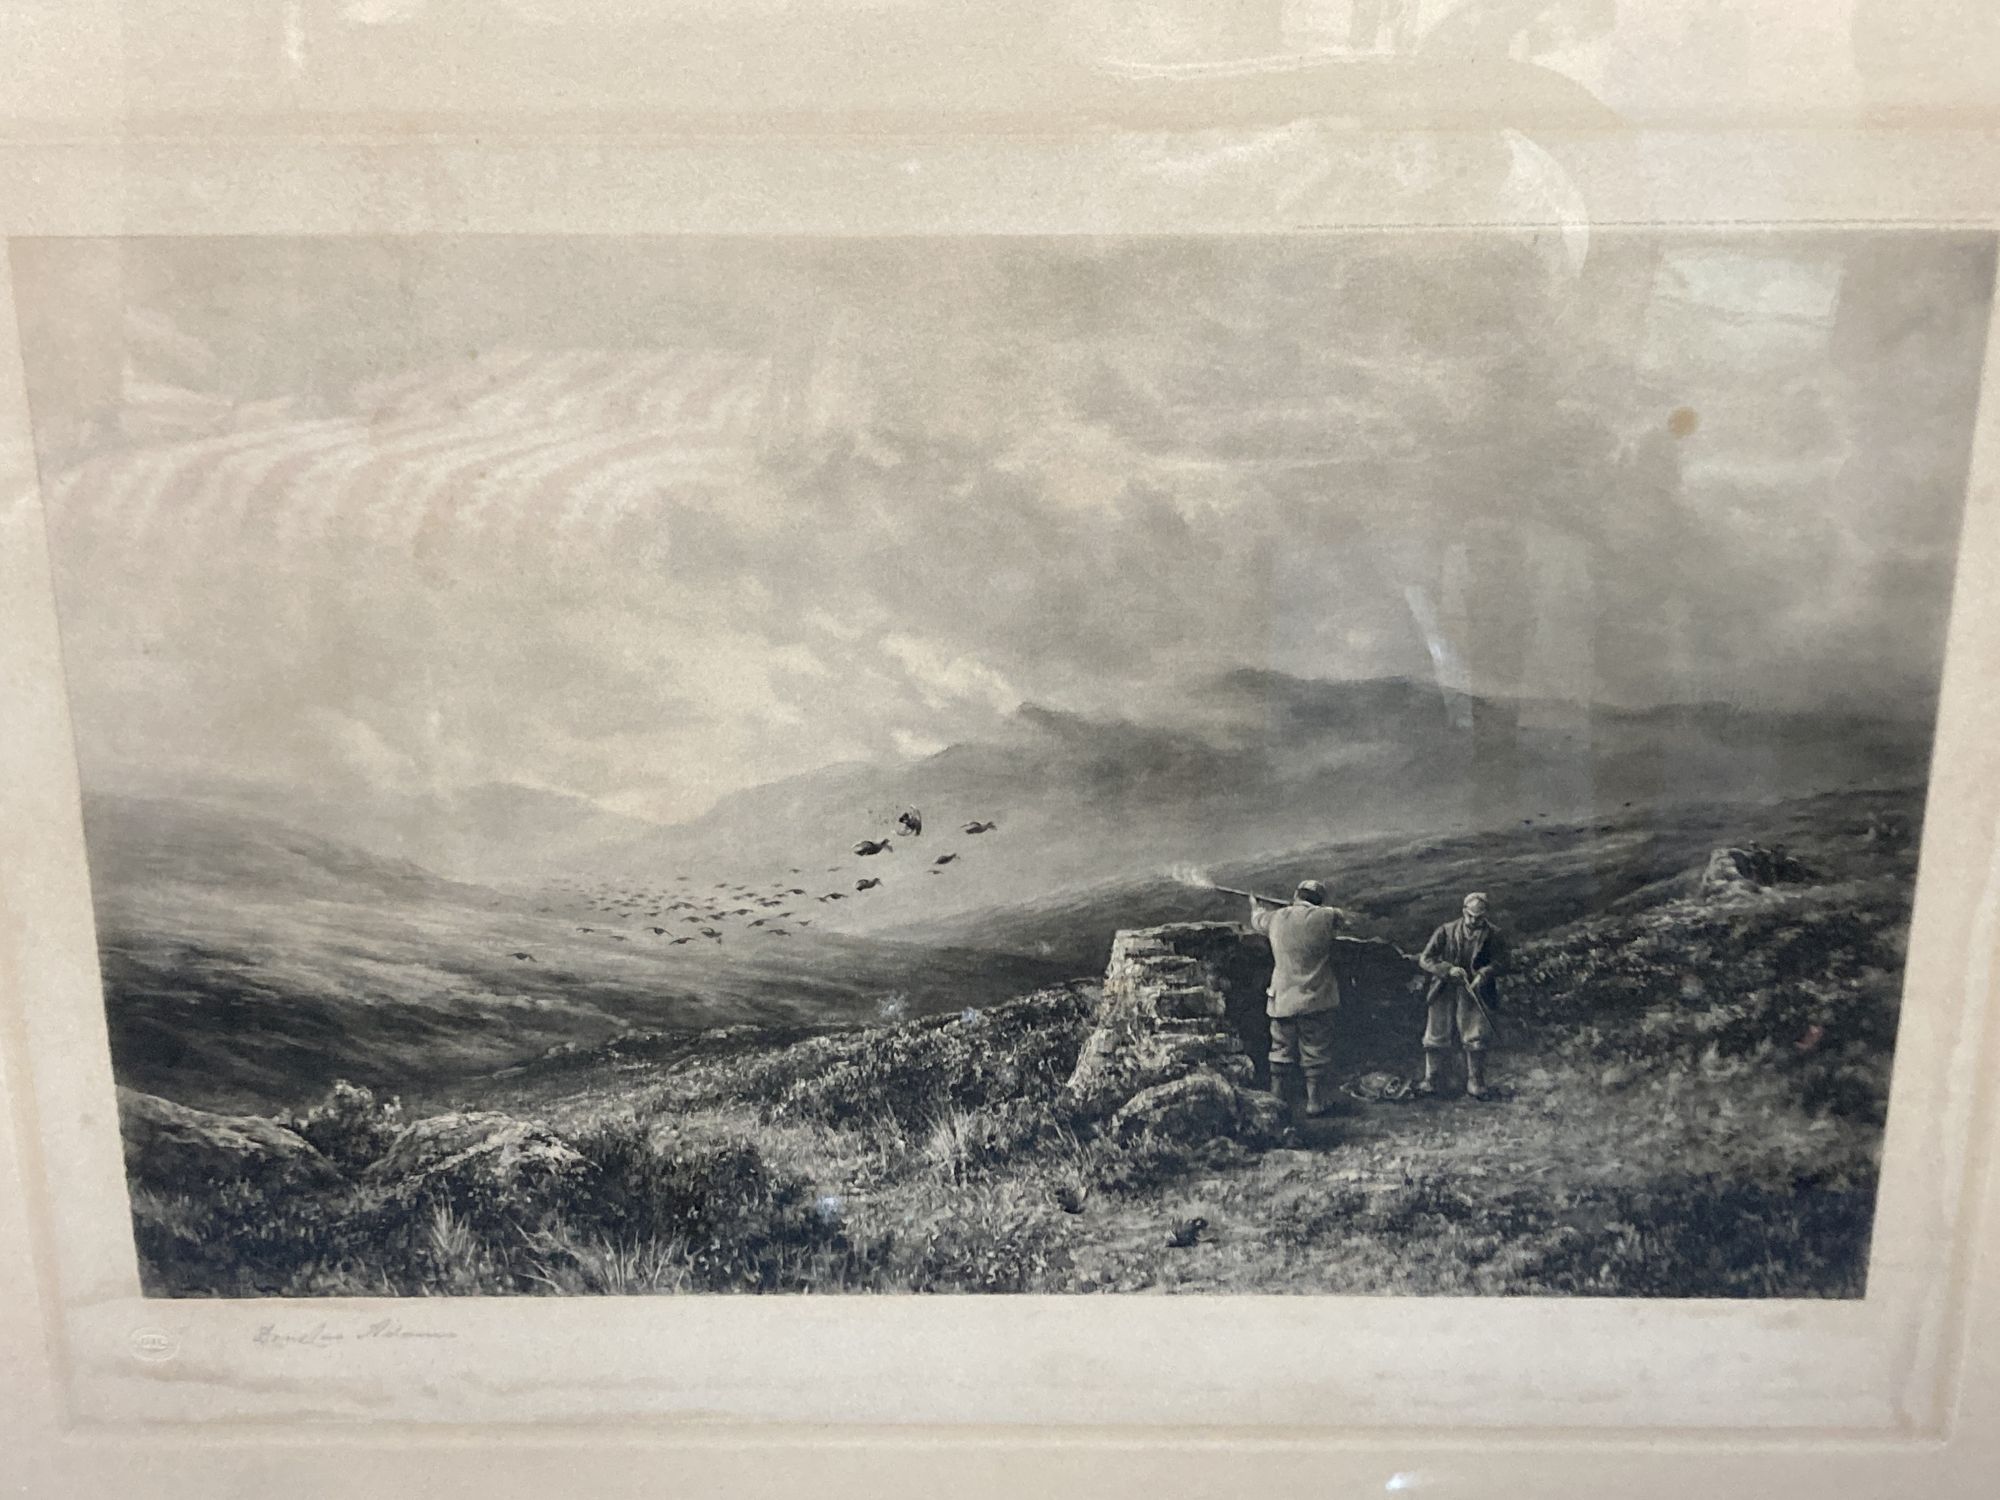 Archibald S. Worthey, photolithograph, Grouse Shooting, signed in pencil, 51 x 82cm, a similar pair of prints by Douglas Adams, 47 x 70